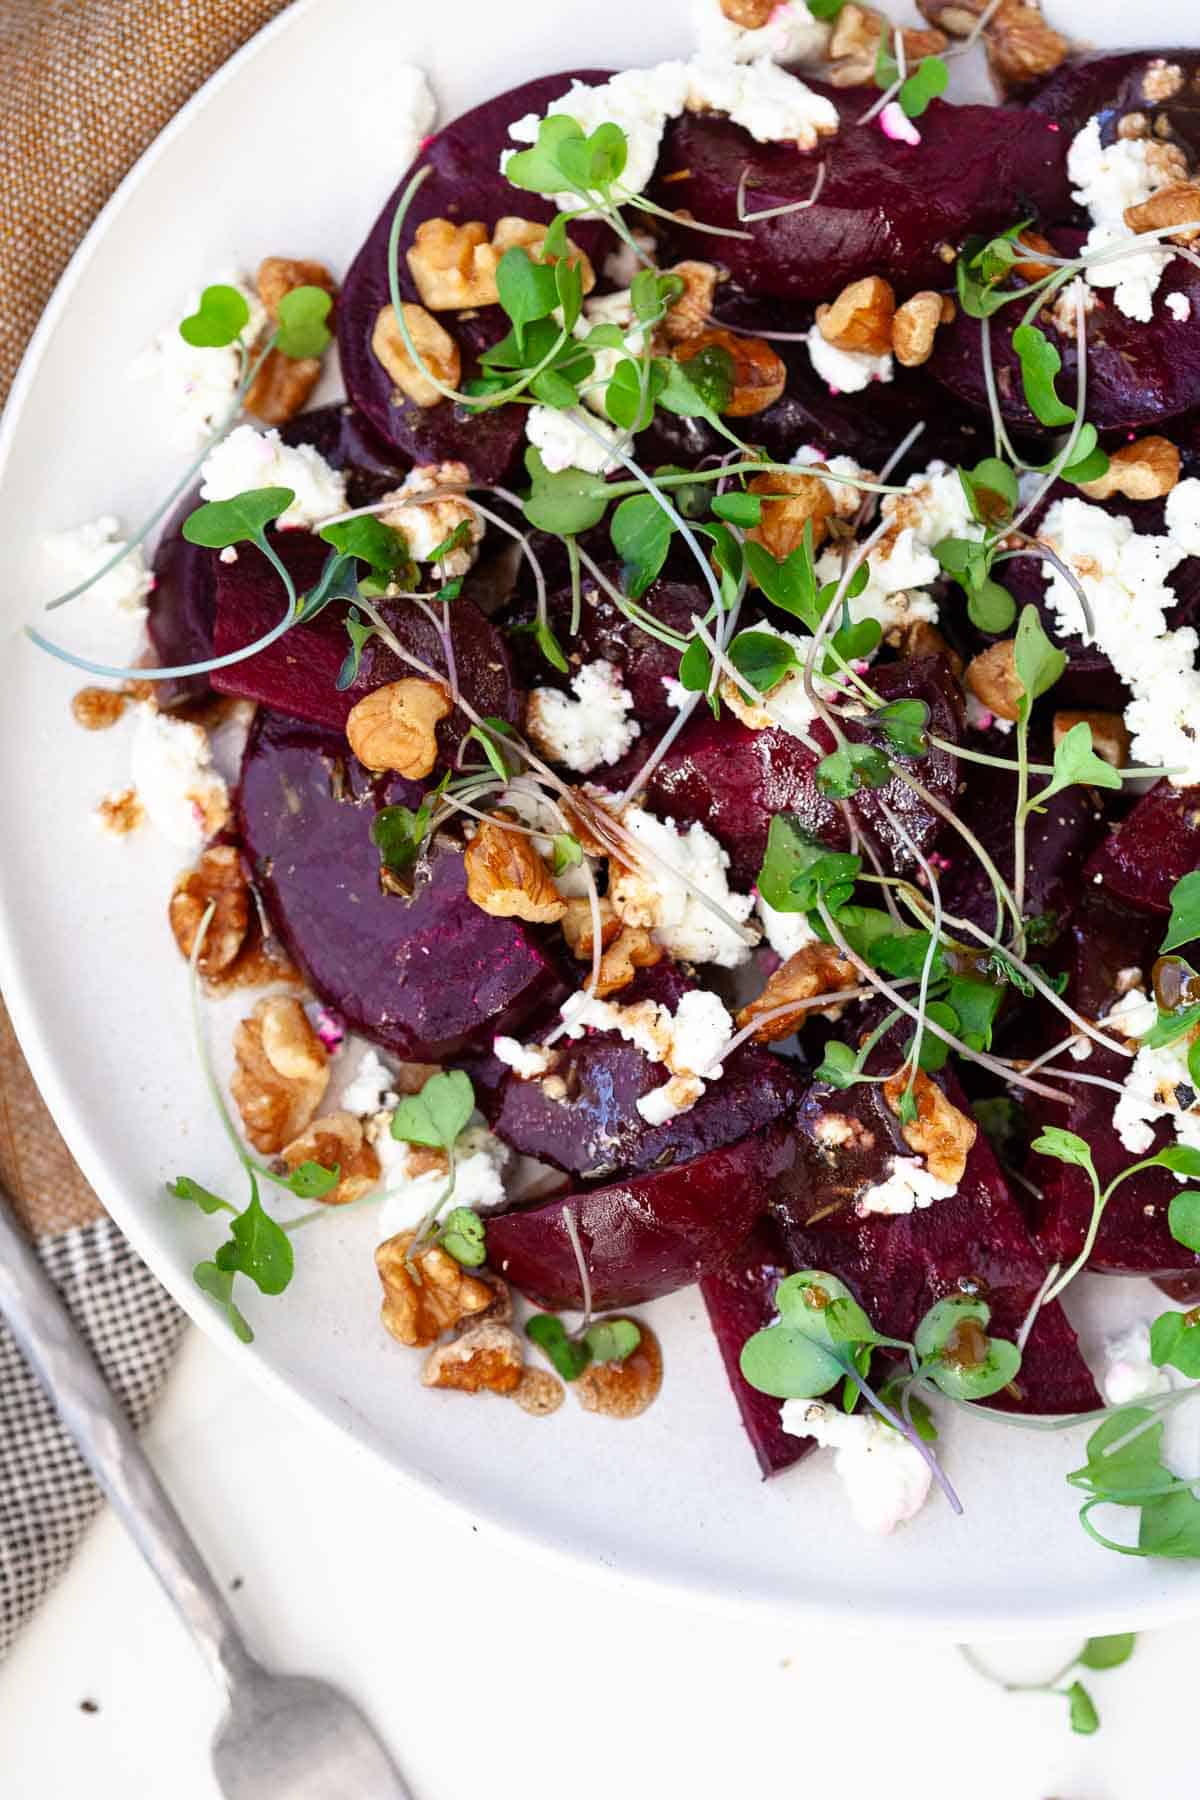 beetroot salad with feta on white plate with roasted beets, crumbled feta cheese, toasted walnuts, and microgreens